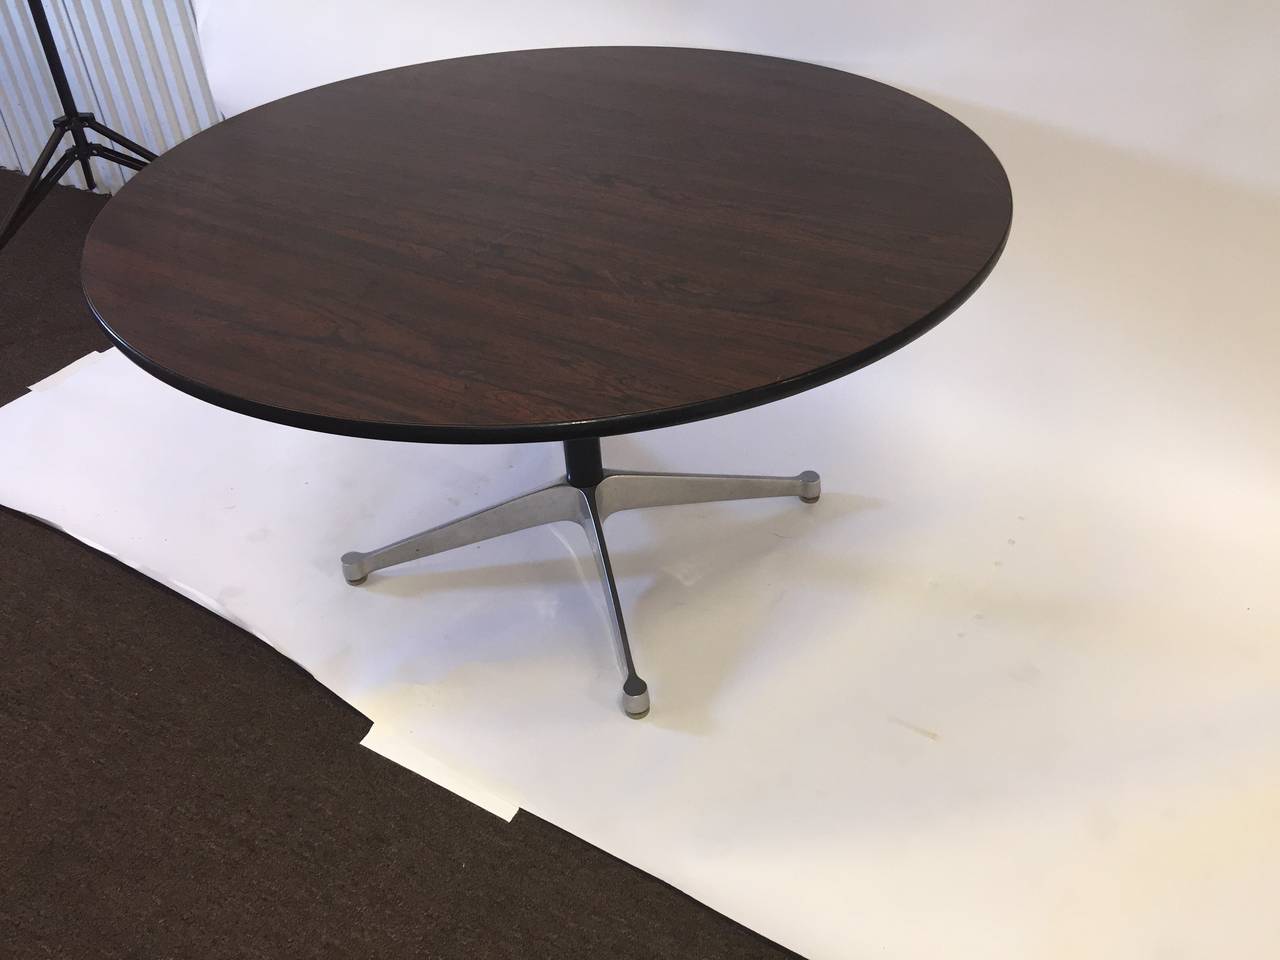 This is a pair of Charles Eames designed for Herman Miller round top tables with an X aluminum base. The tops are rosewood laminate in nice shape circa 1970s-1980s. Perfect for a dining table in a modern space.
Can be purchased separately at